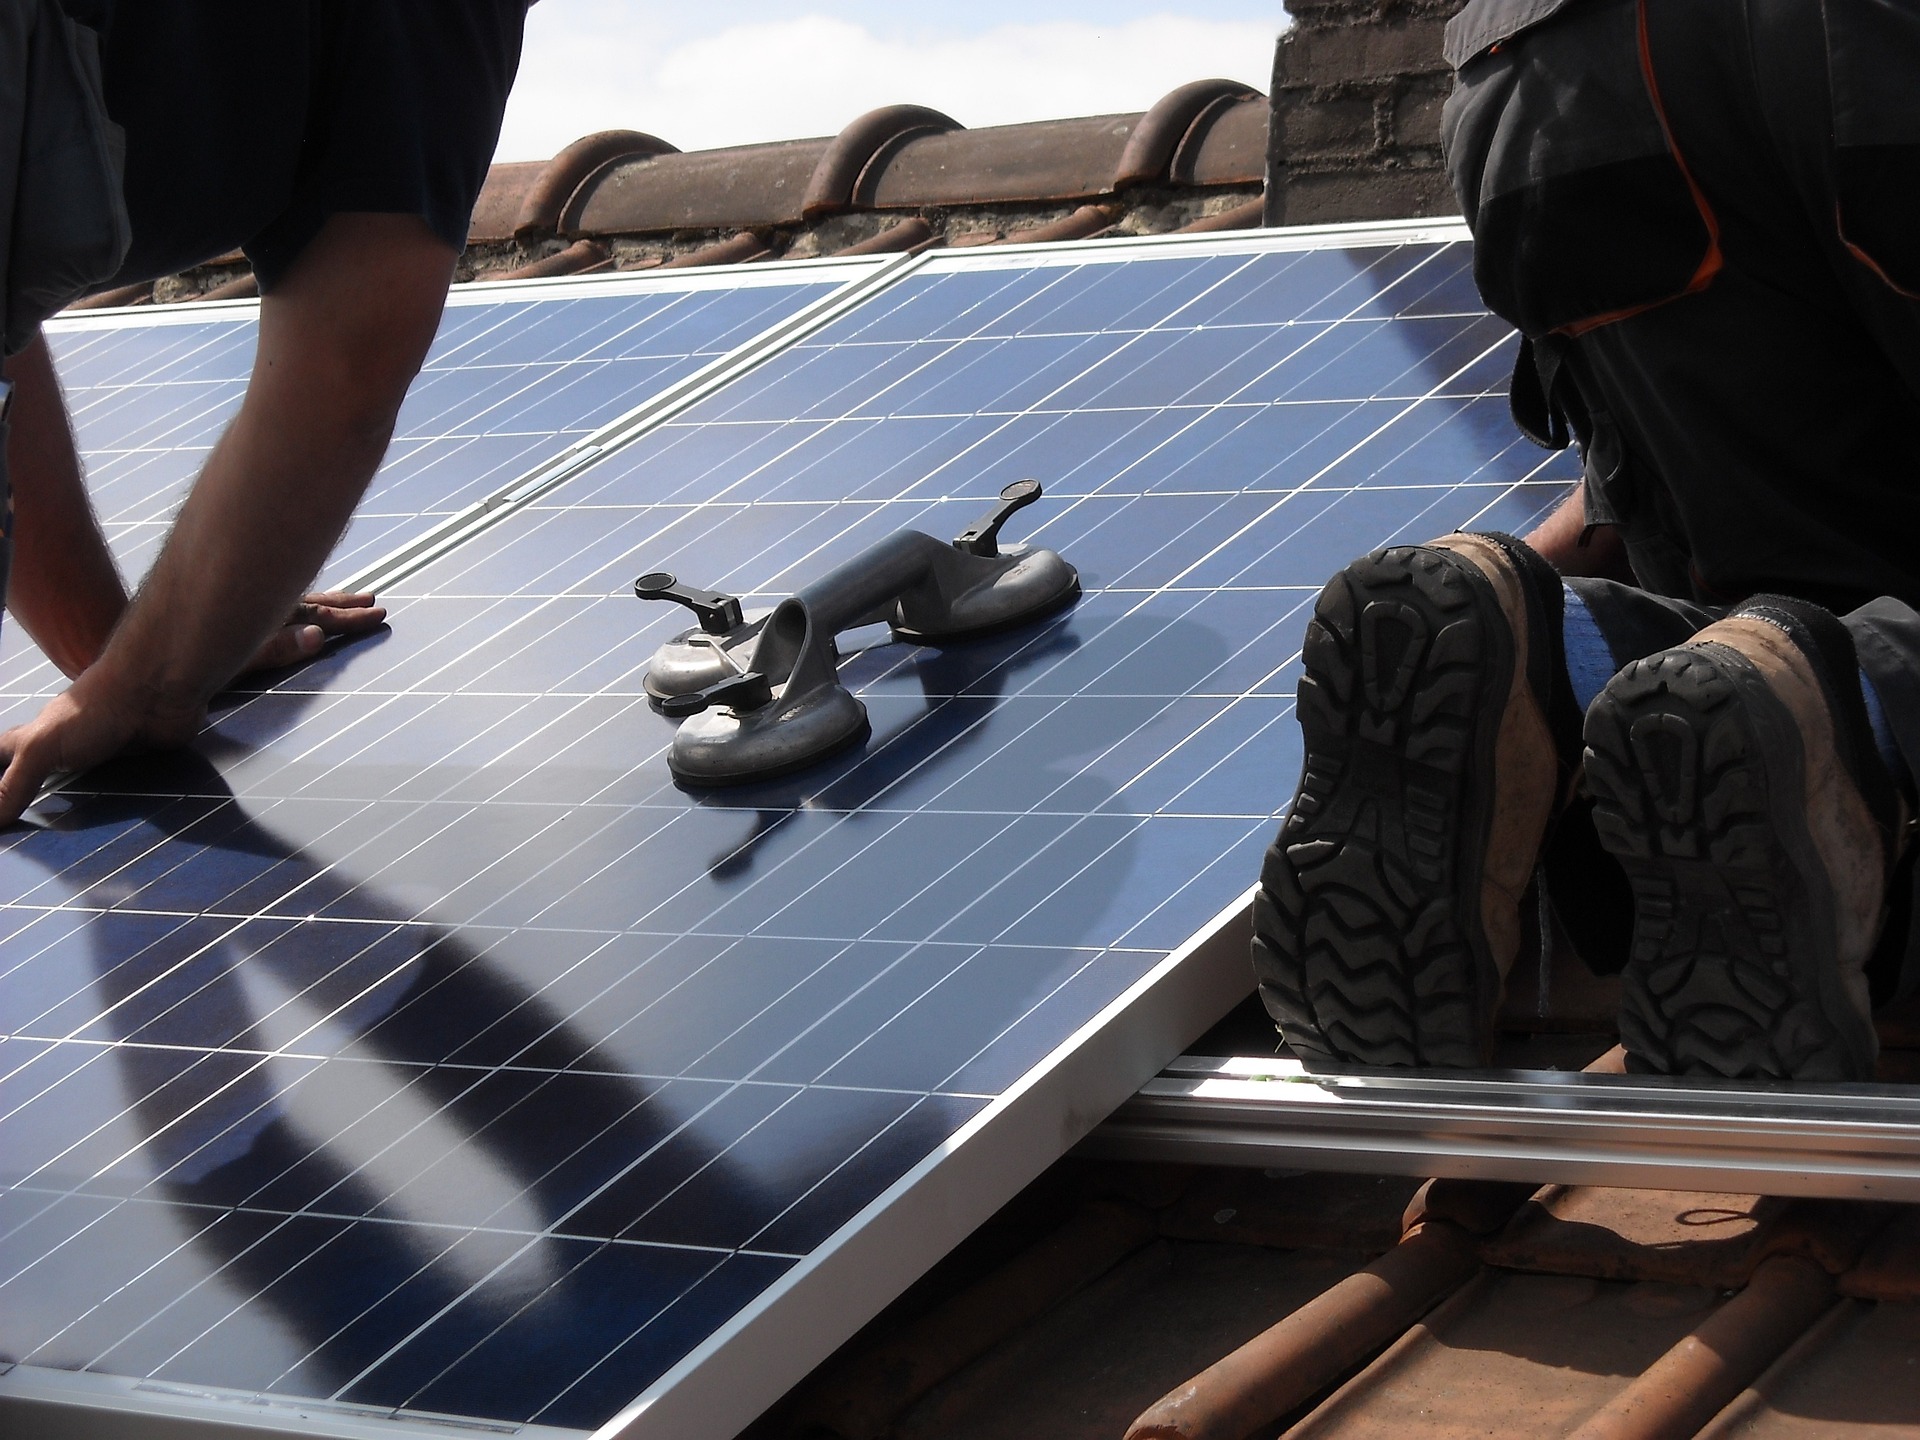 Worker placing solar panels on roof.